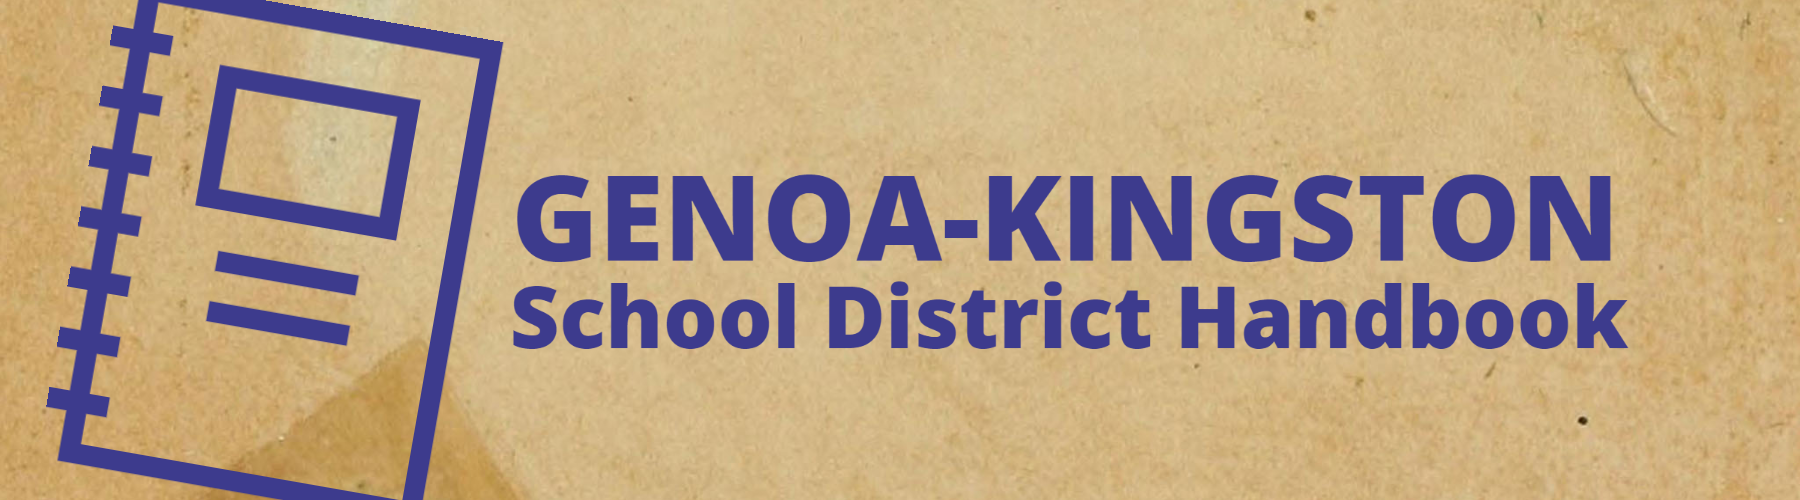 Background is brown paper. On the left is a blue notebook graphic and on the right in text, "Genoa-Kingston School District Handbook" 